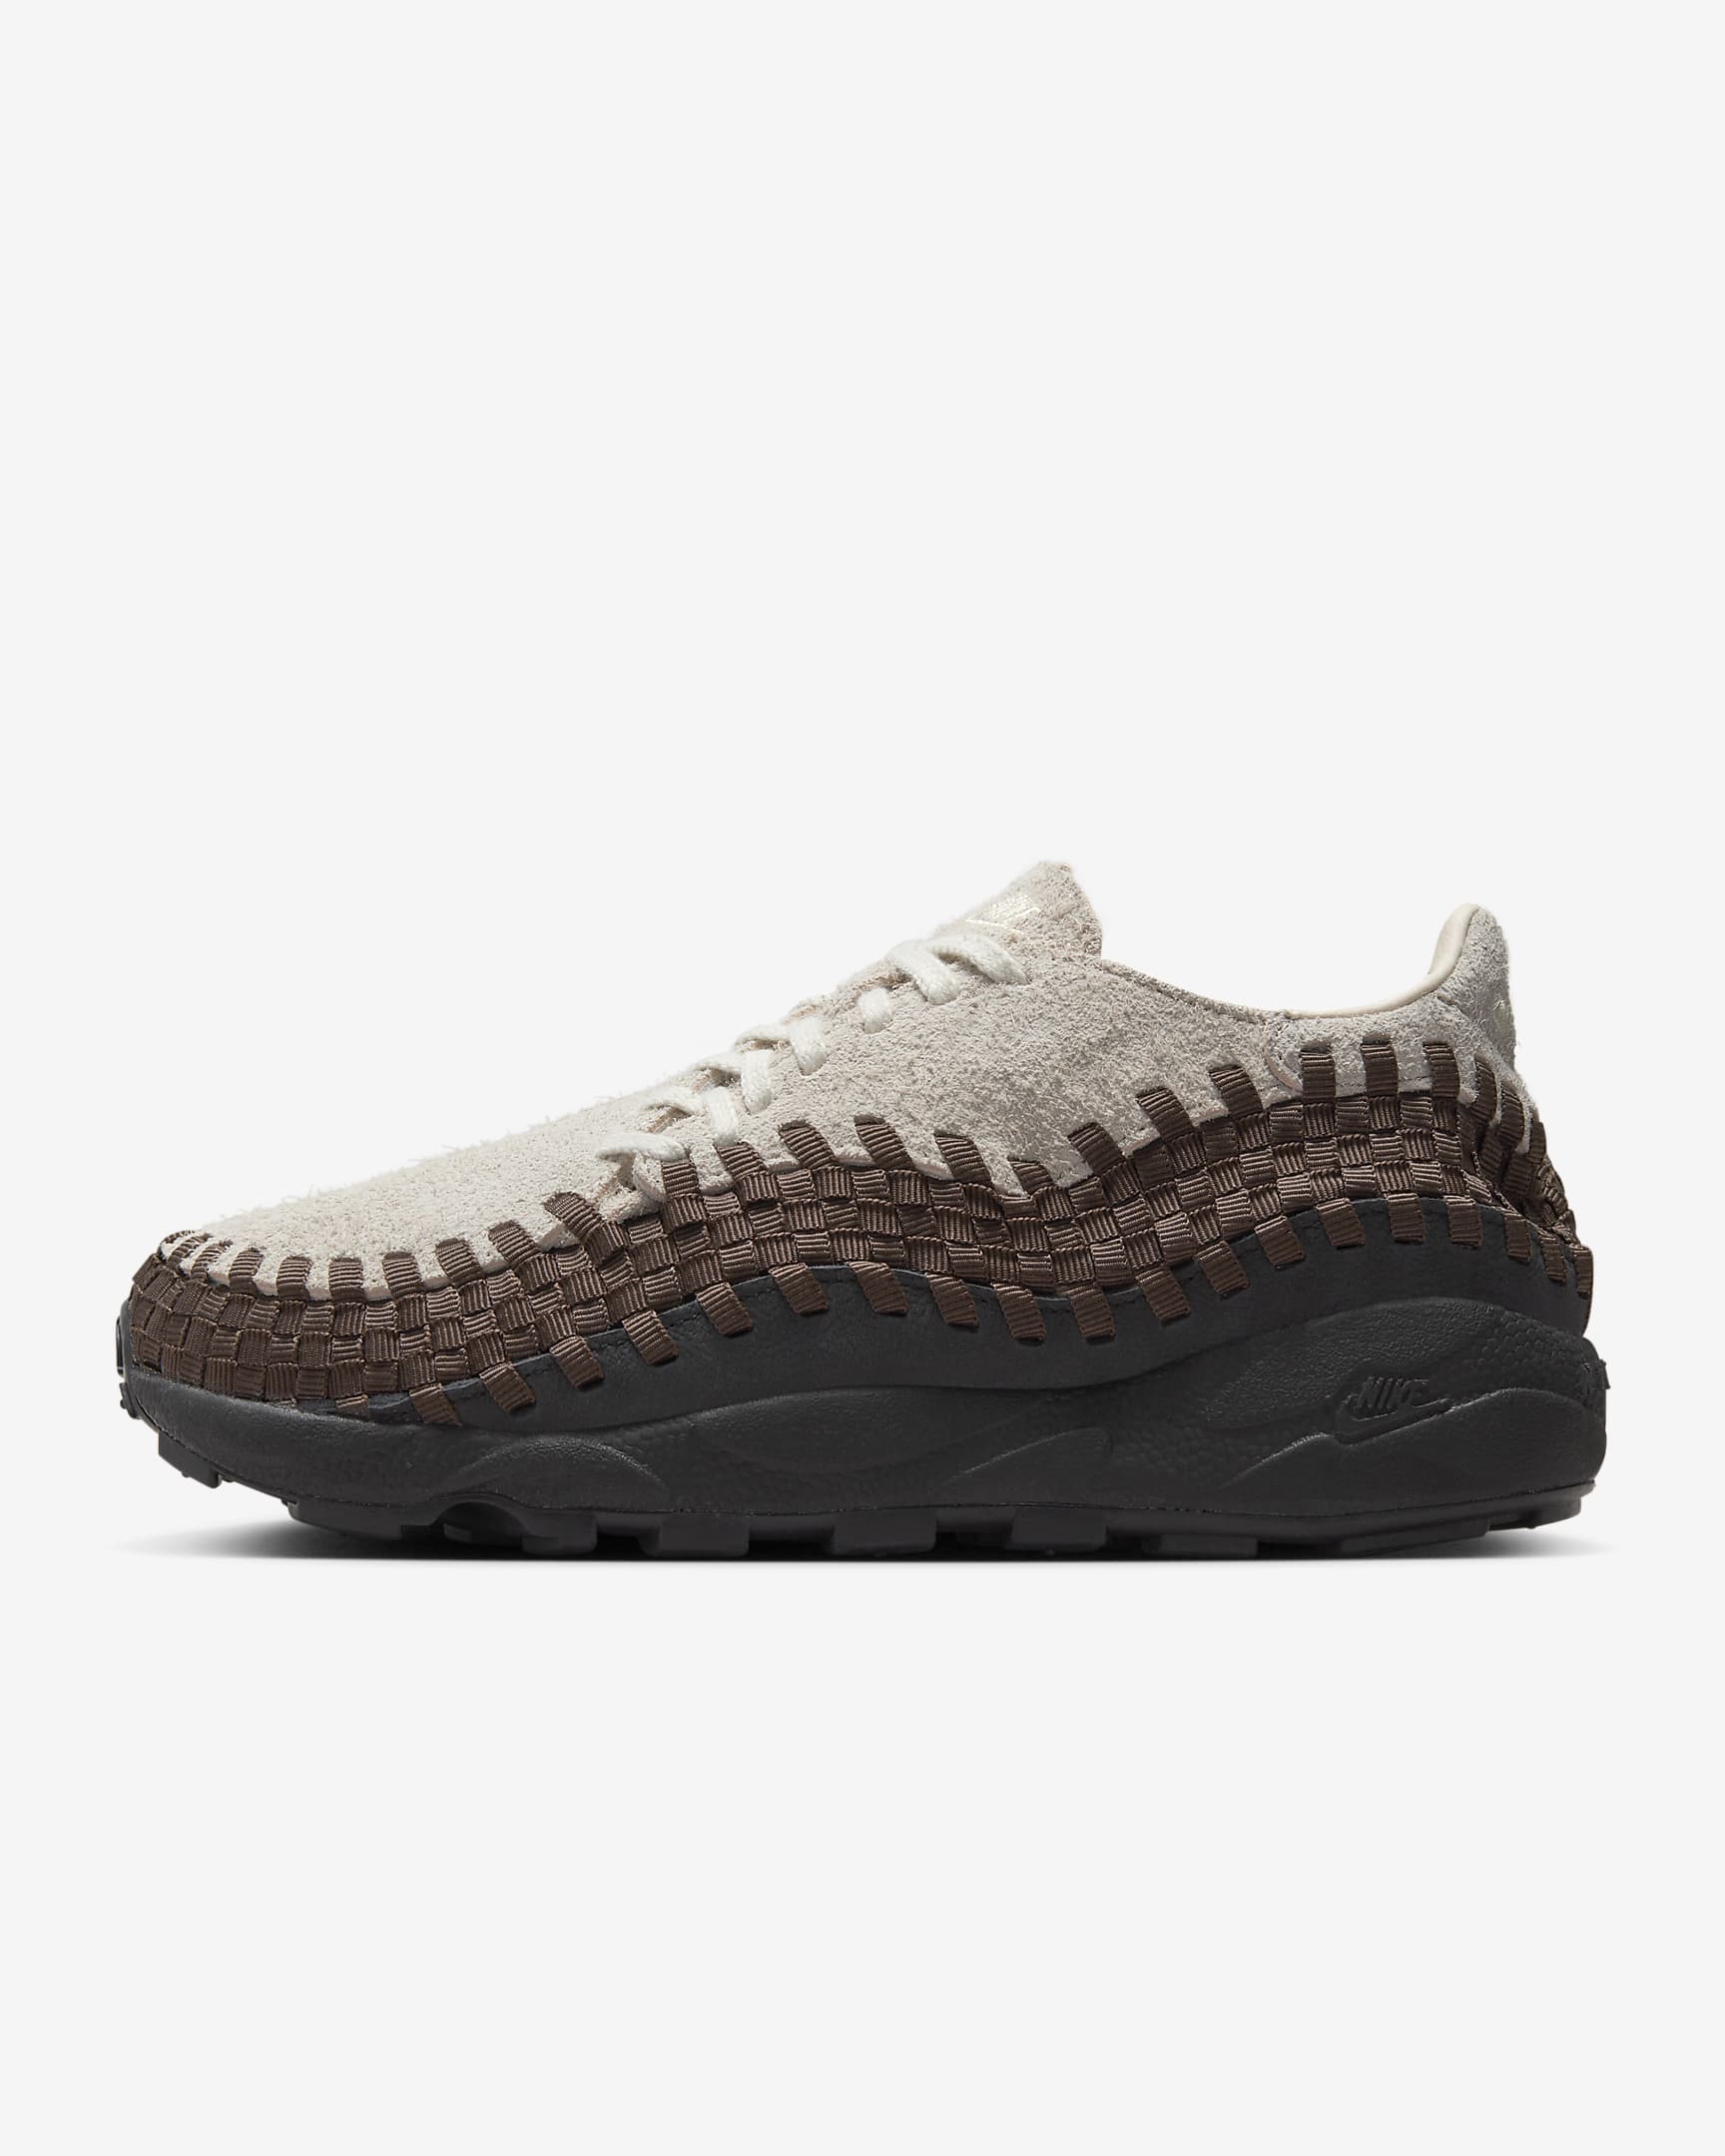 Nike Air Footscape Woven Women's Shoes. Nike IL